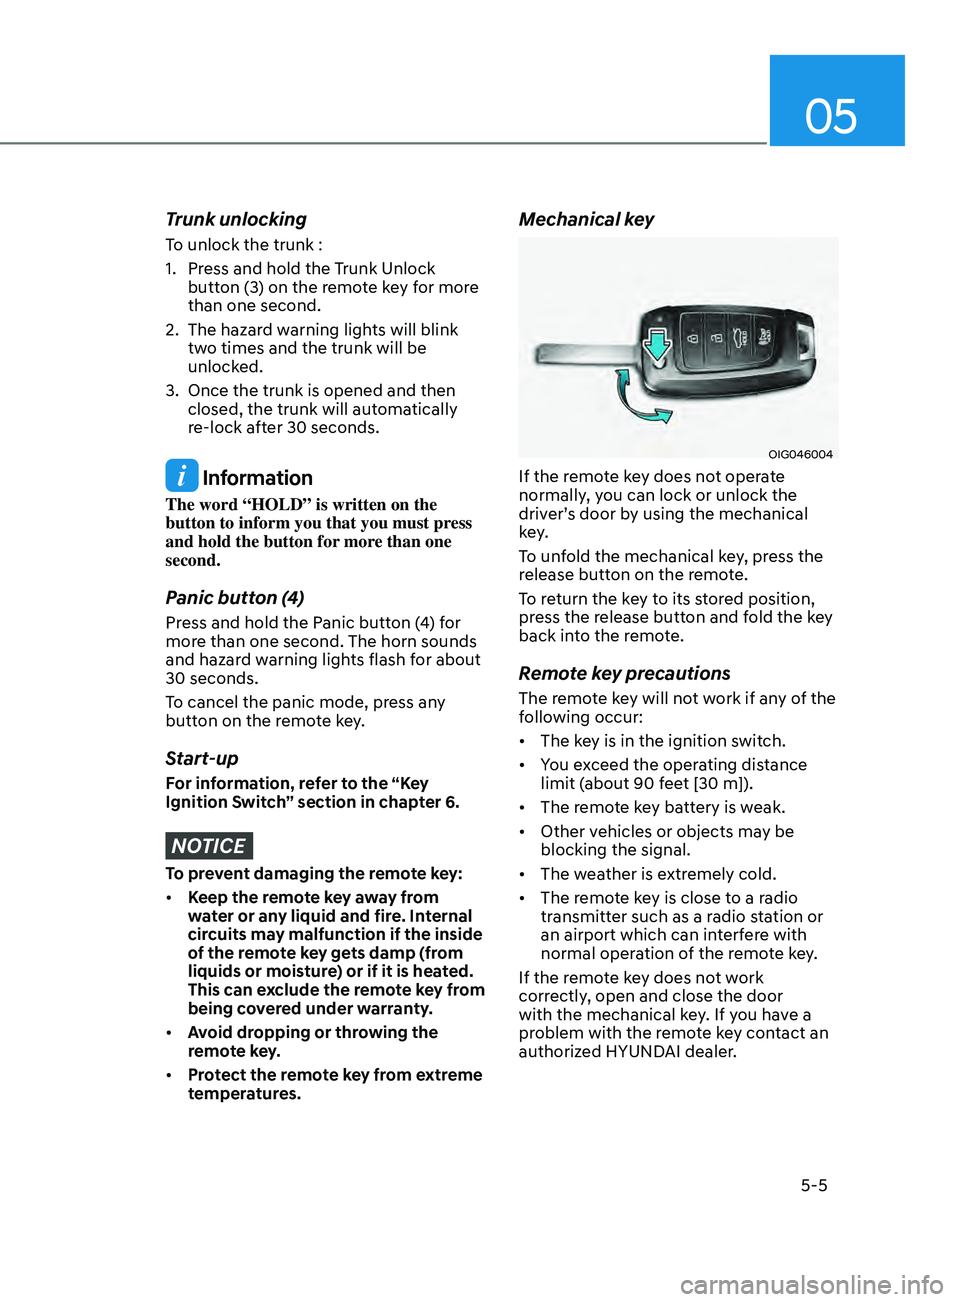 HYUNDAI SONATA 2022  Owners Manual 05
5-5
Trunk unlocking
To unlock the trunk :
1. 
Pr
 ess and hold the Trunk Unlock 
button (3) on the remote key for more 
than one second.
2.
 
The hazar
 d warning lights will blink 
two times and t